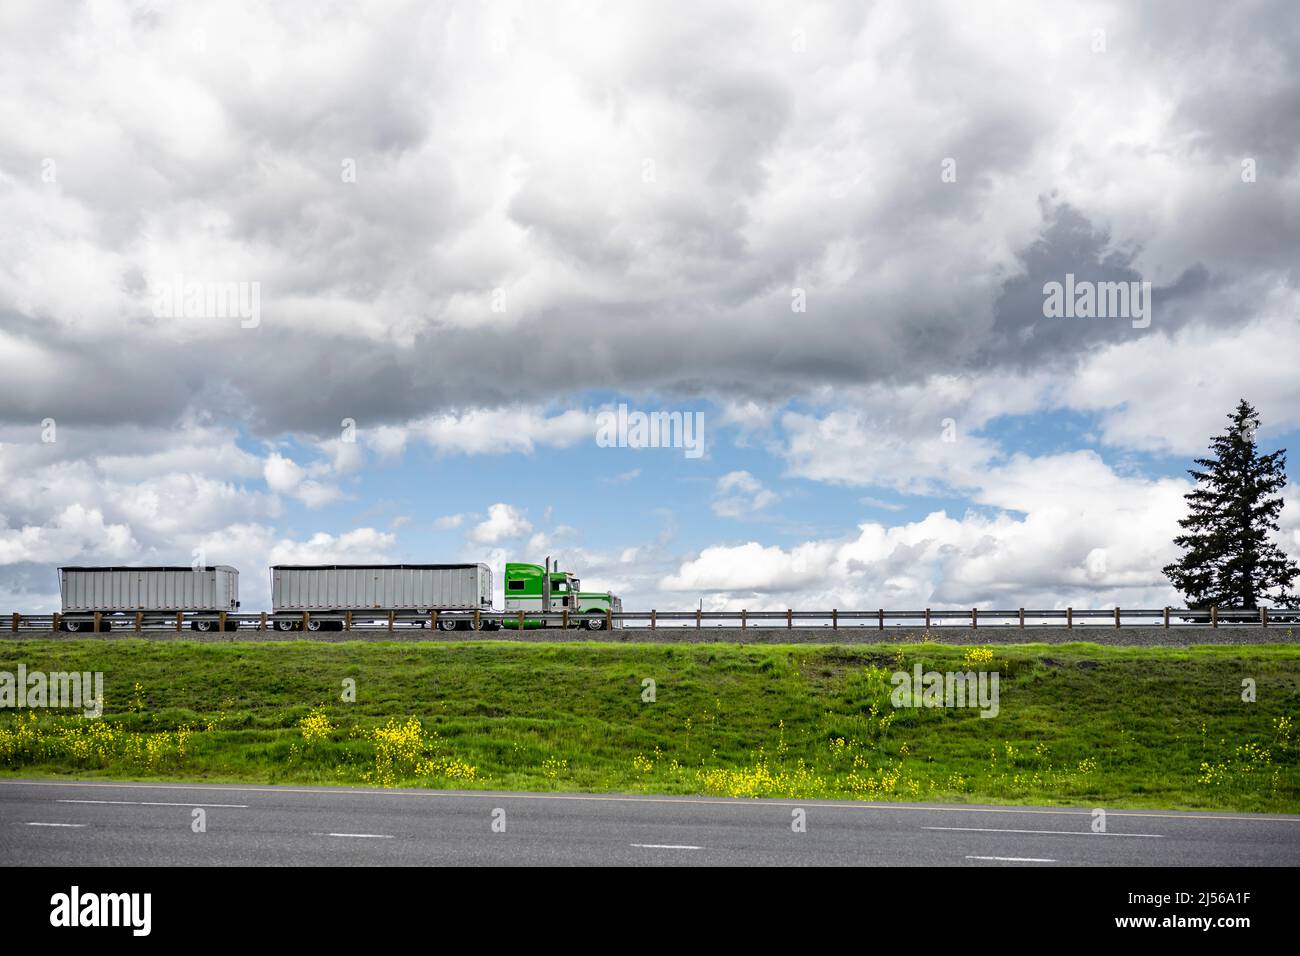 Industrial powerful classic bonnet American green big rig semi truck tractor with two loaded bulk semi trailers transporting cargo running on the road Stock Photo